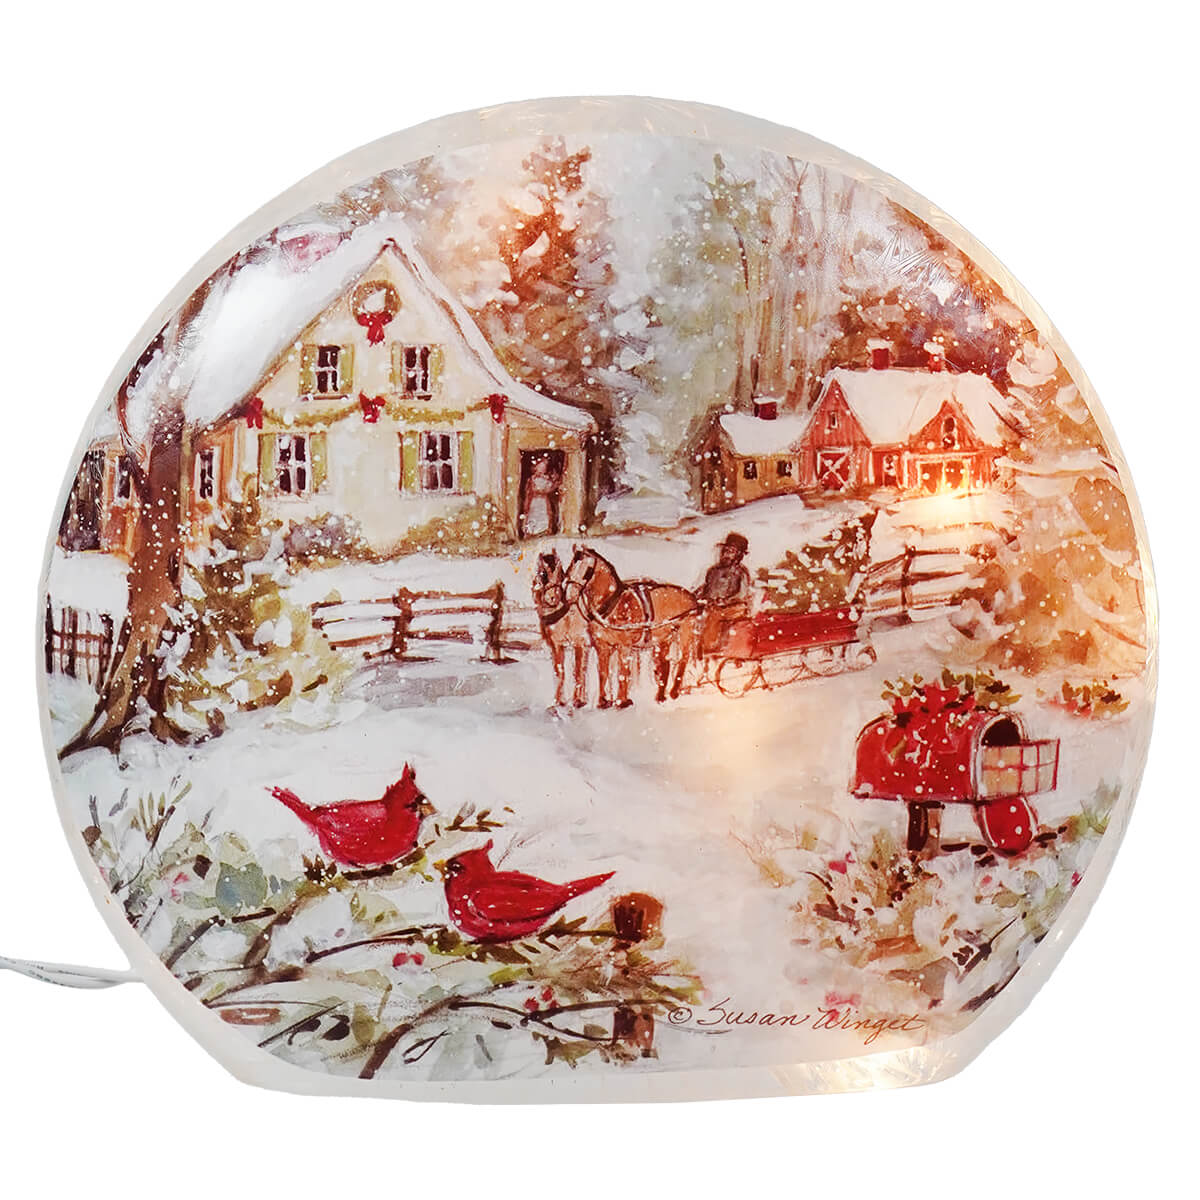 Lighted Frosted Glass Cardinals & Sleigh Winter Scene Luminary